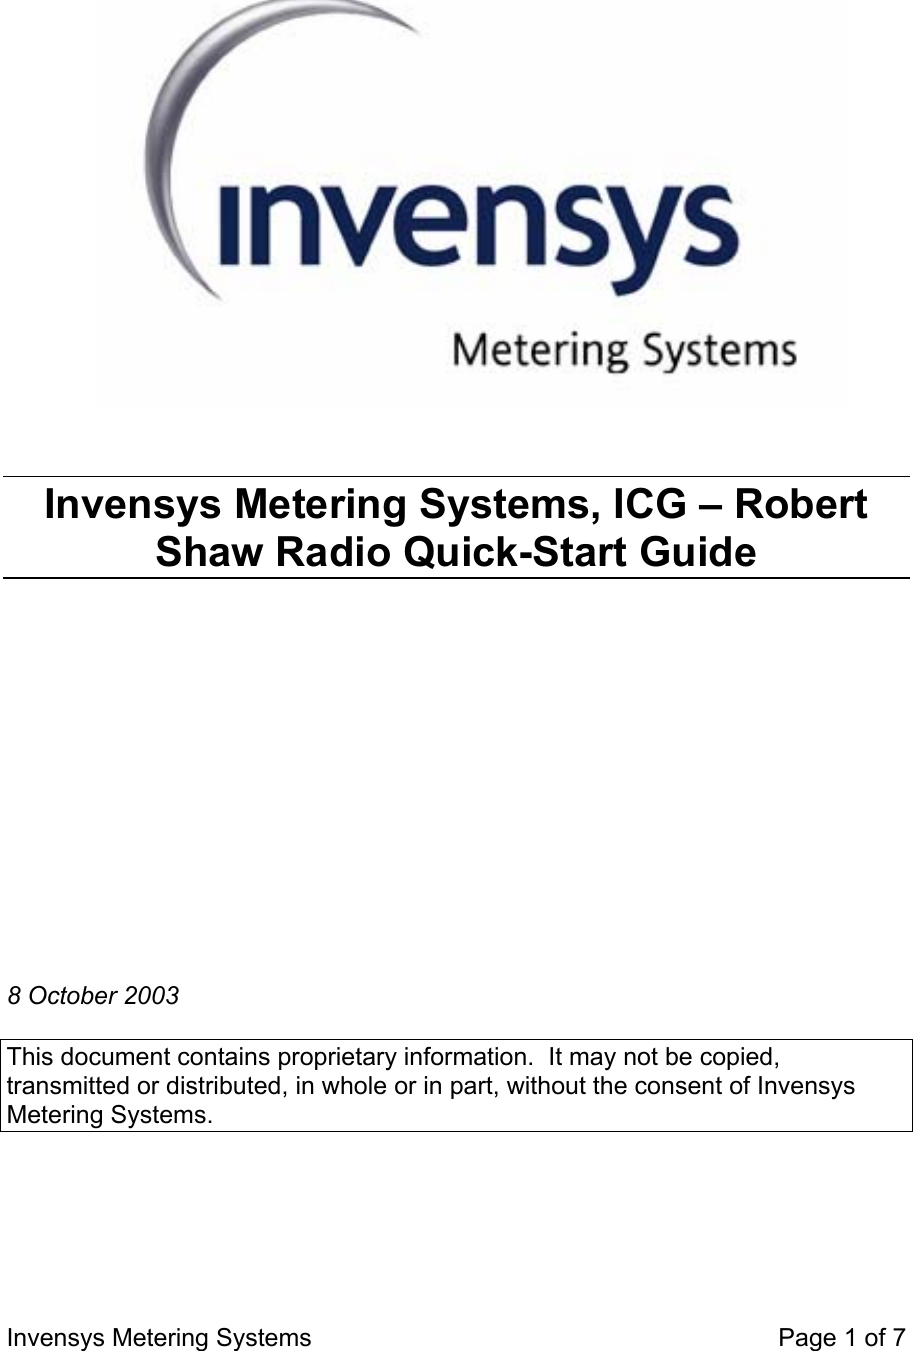  Invensys Metering Systems    Page 1 of 7   Invensys Metering Systems, ICG – Robert Shaw Radio Quick-Start Guide               8 October 2003  This document contains proprietary information.  It may not be copied, transmitted or distributed, in whole or in part, without the consent of Invensys Metering Systems. 